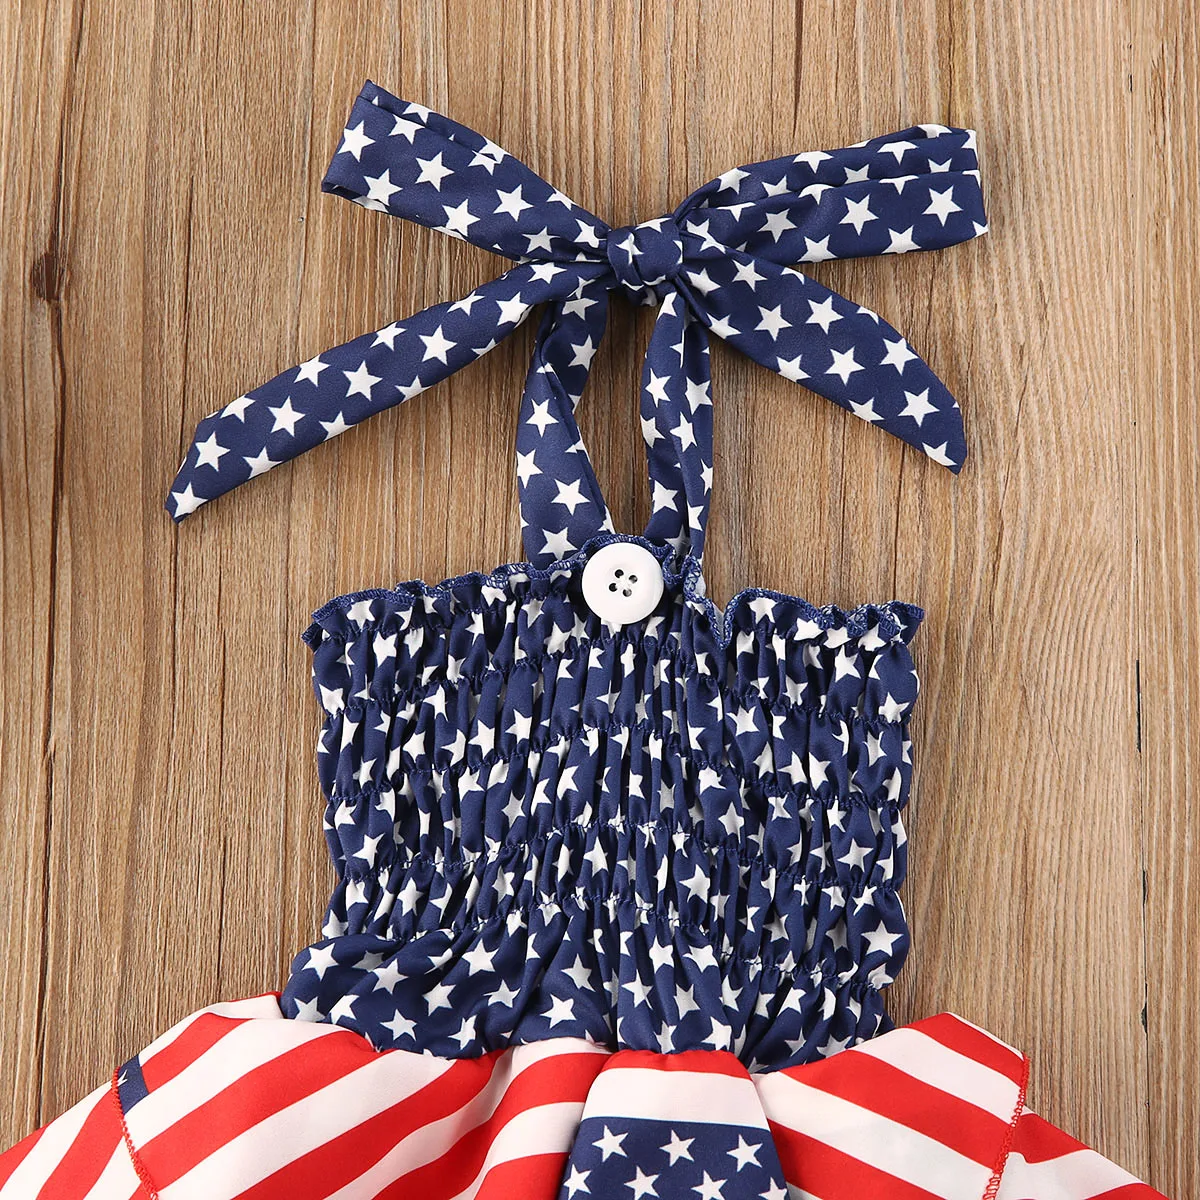 Ruffle Dress Independence Day Outfit Toddler Baby Girls 4th of July American Flag Stripe Stars Print Halter Suspender Kids Dress enlarge